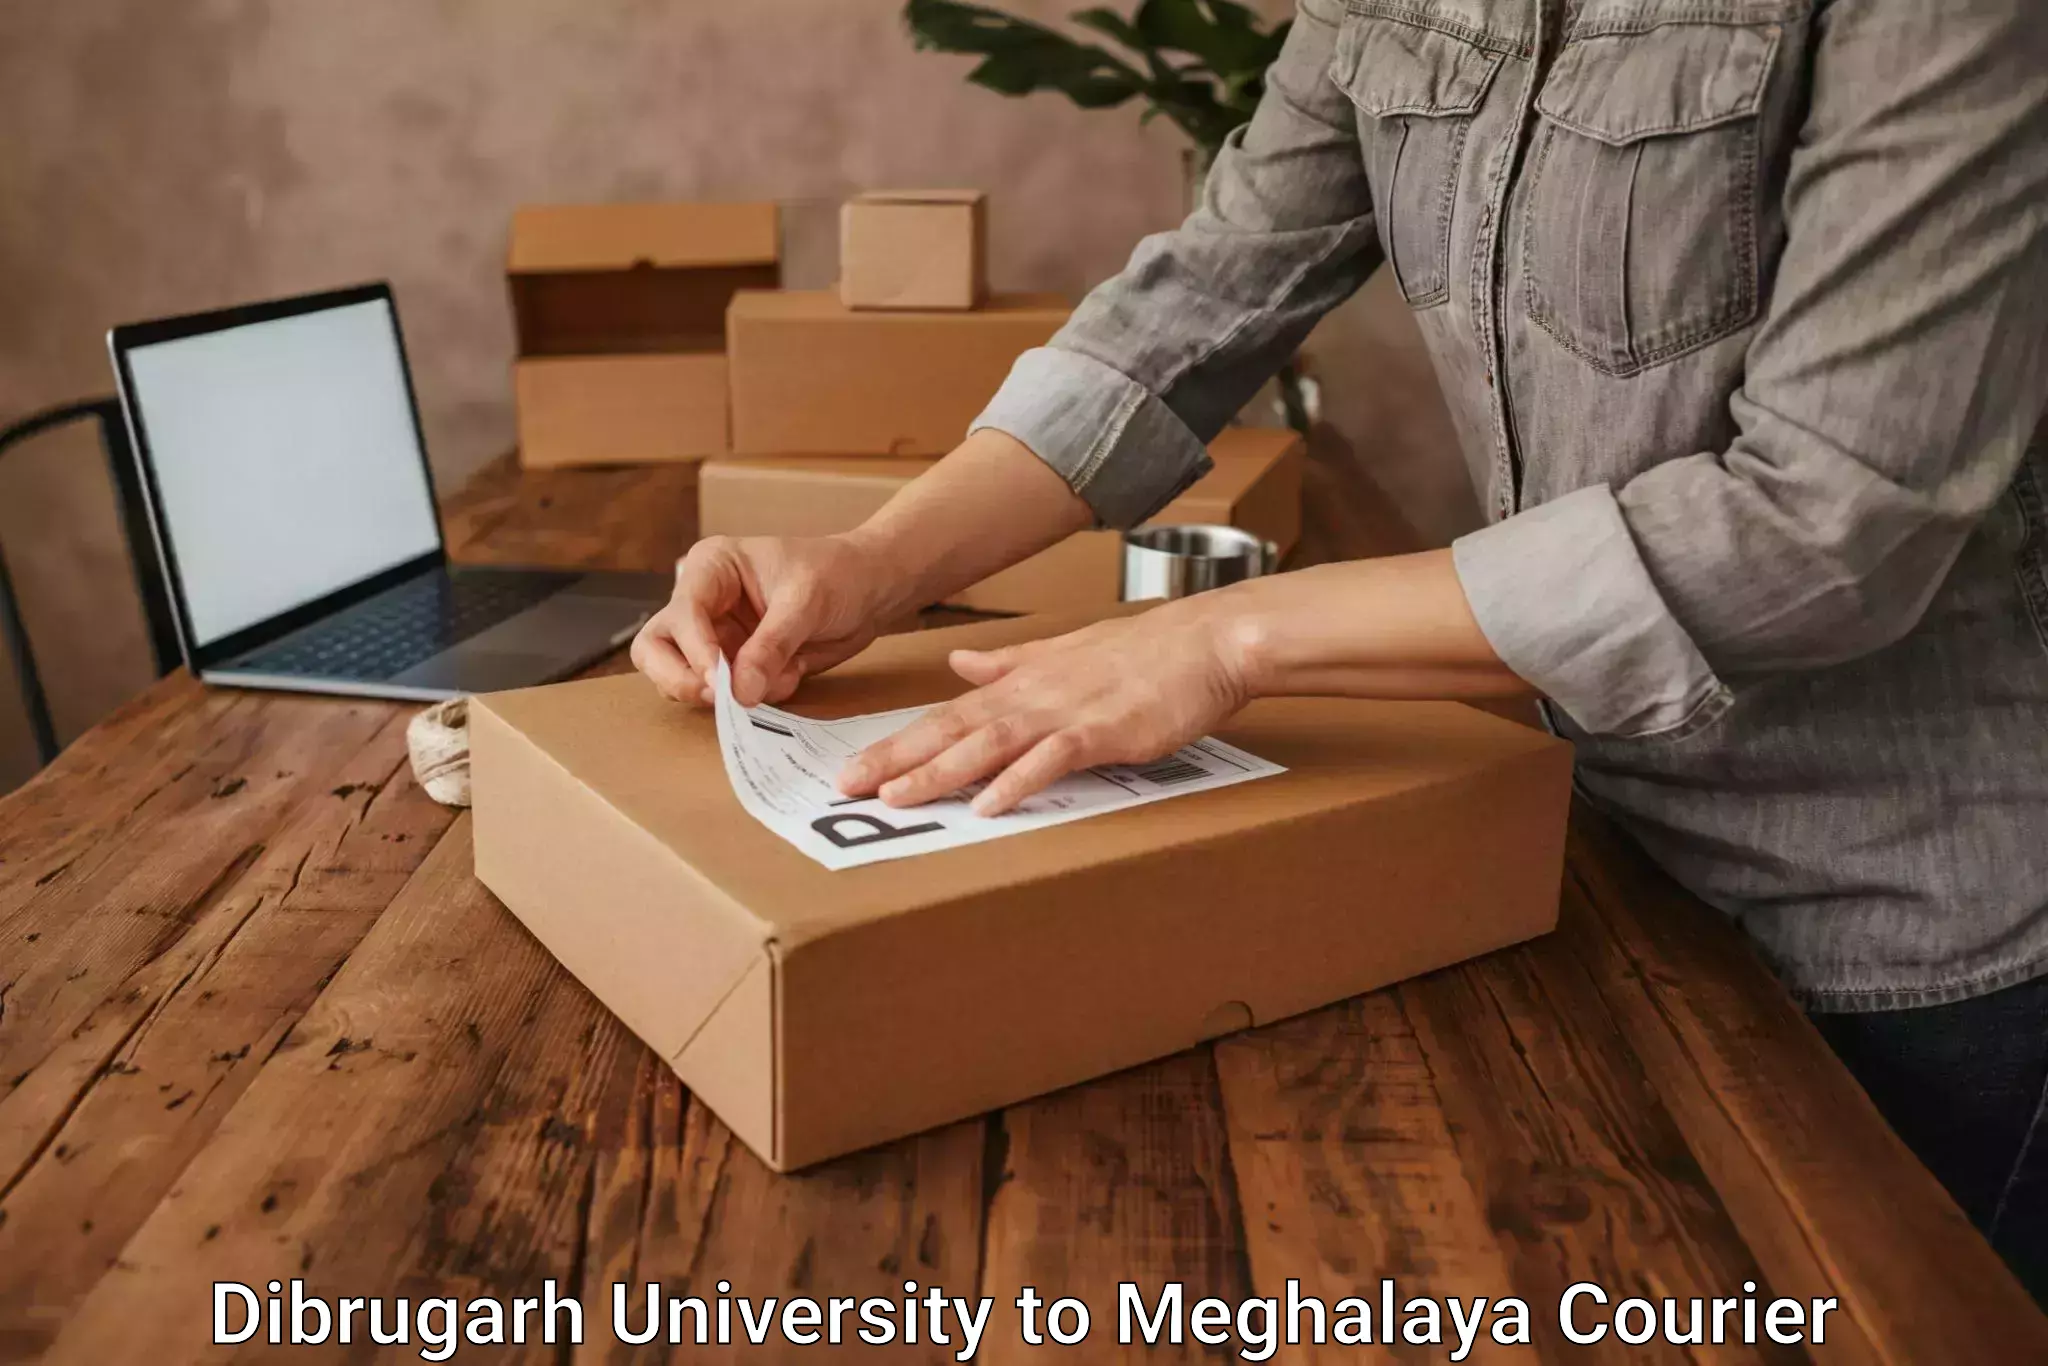 Local delivery service Dibrugarh University to Meghalaya